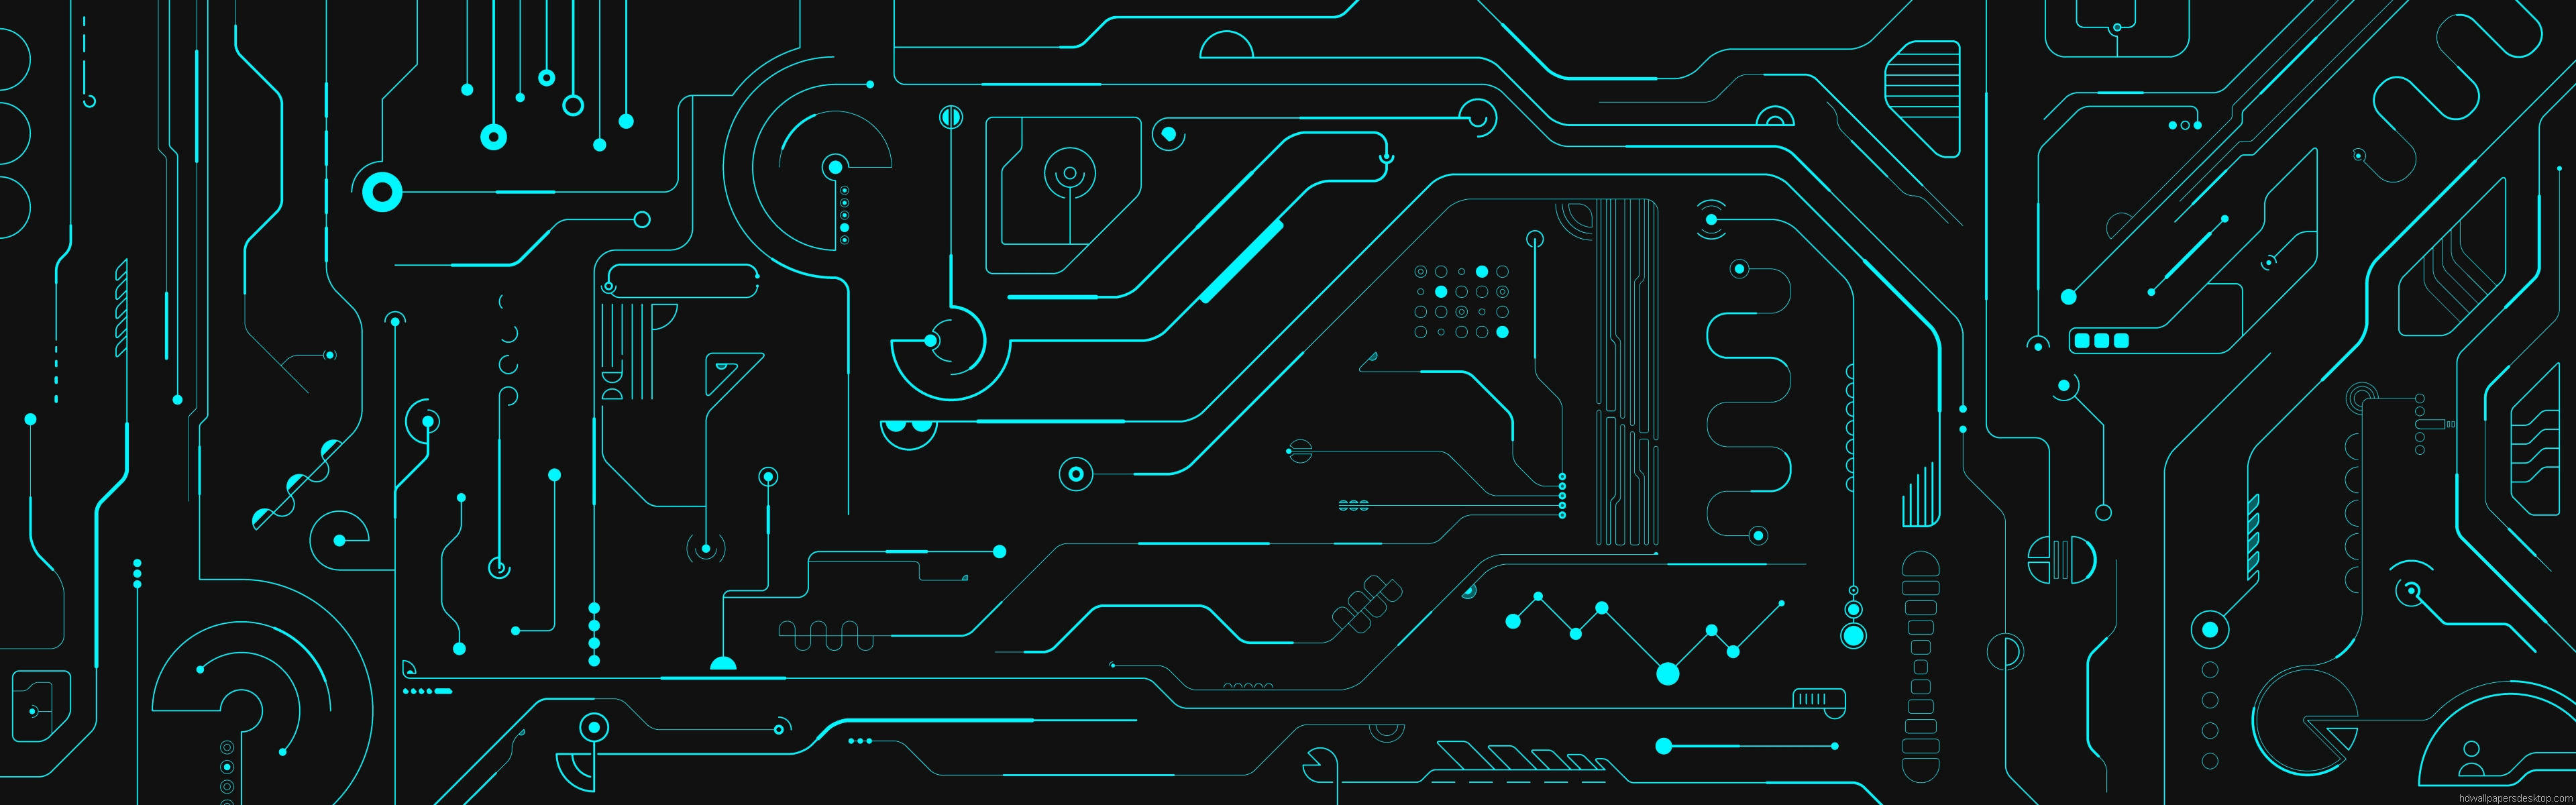 High Resolution Dual Monitor Circuit Board Background